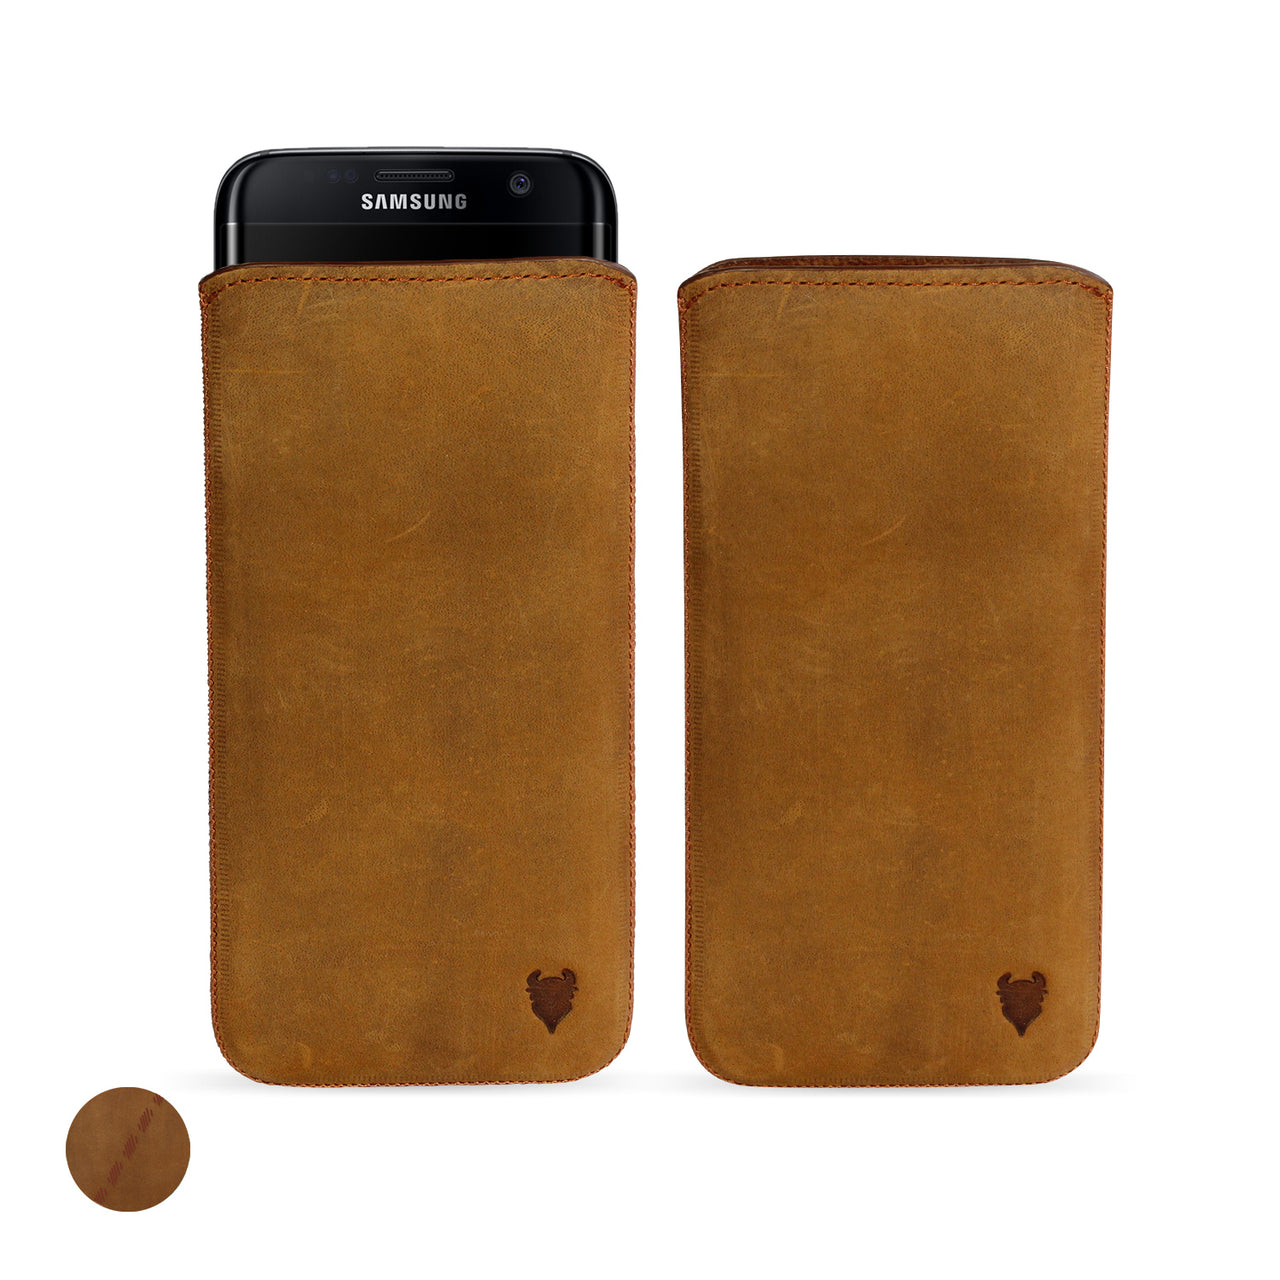 Samsung Galaxy A8 (2018) Genuine Leather Pouch Sleeve Case | Artisanpouch